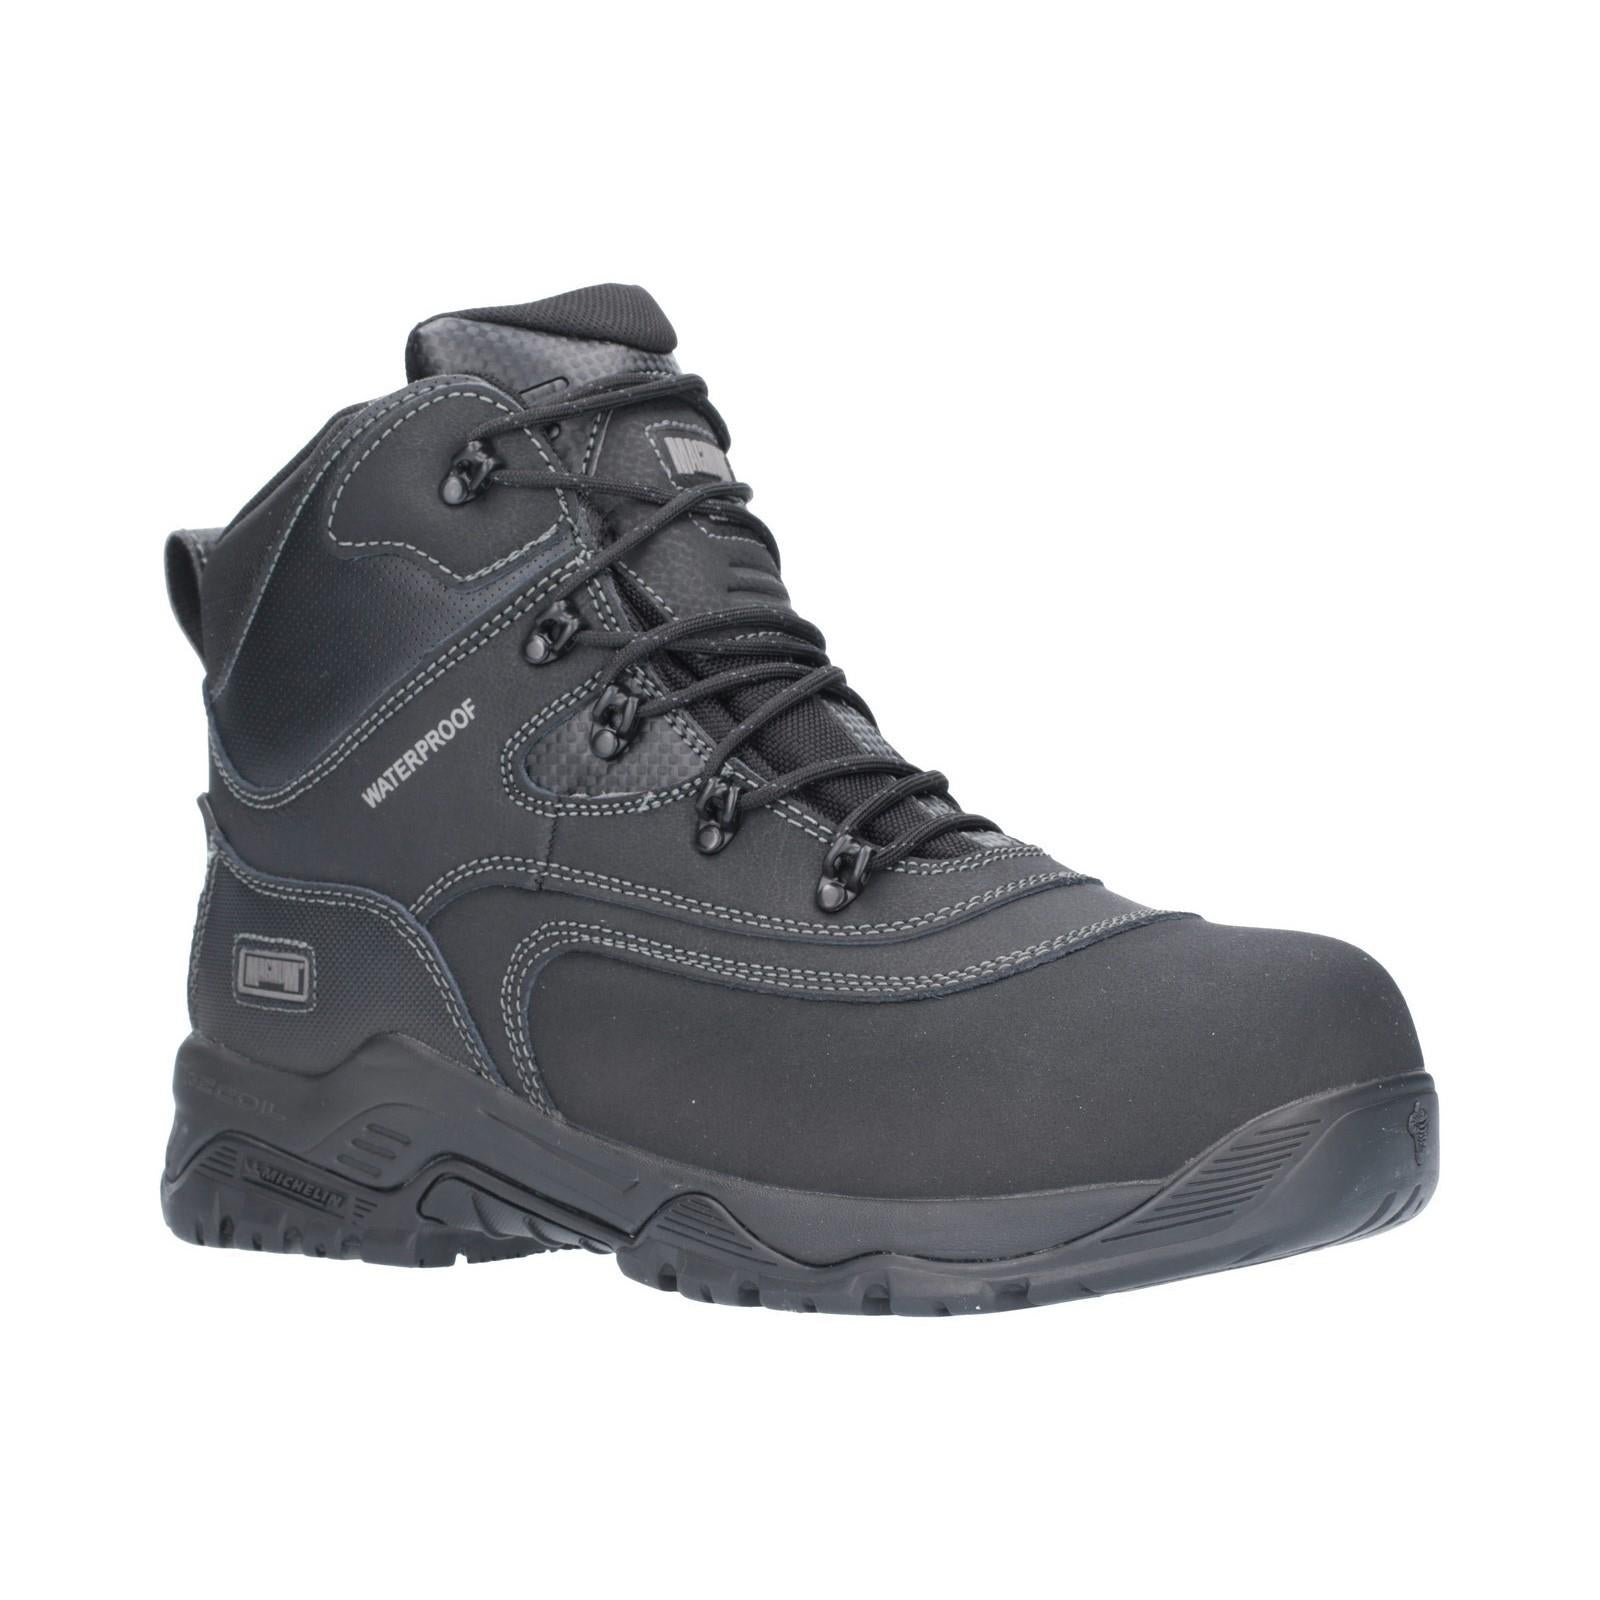 MAGNUM Broadside 6.0 S3 black waterproof non-metal safety boot with midsole